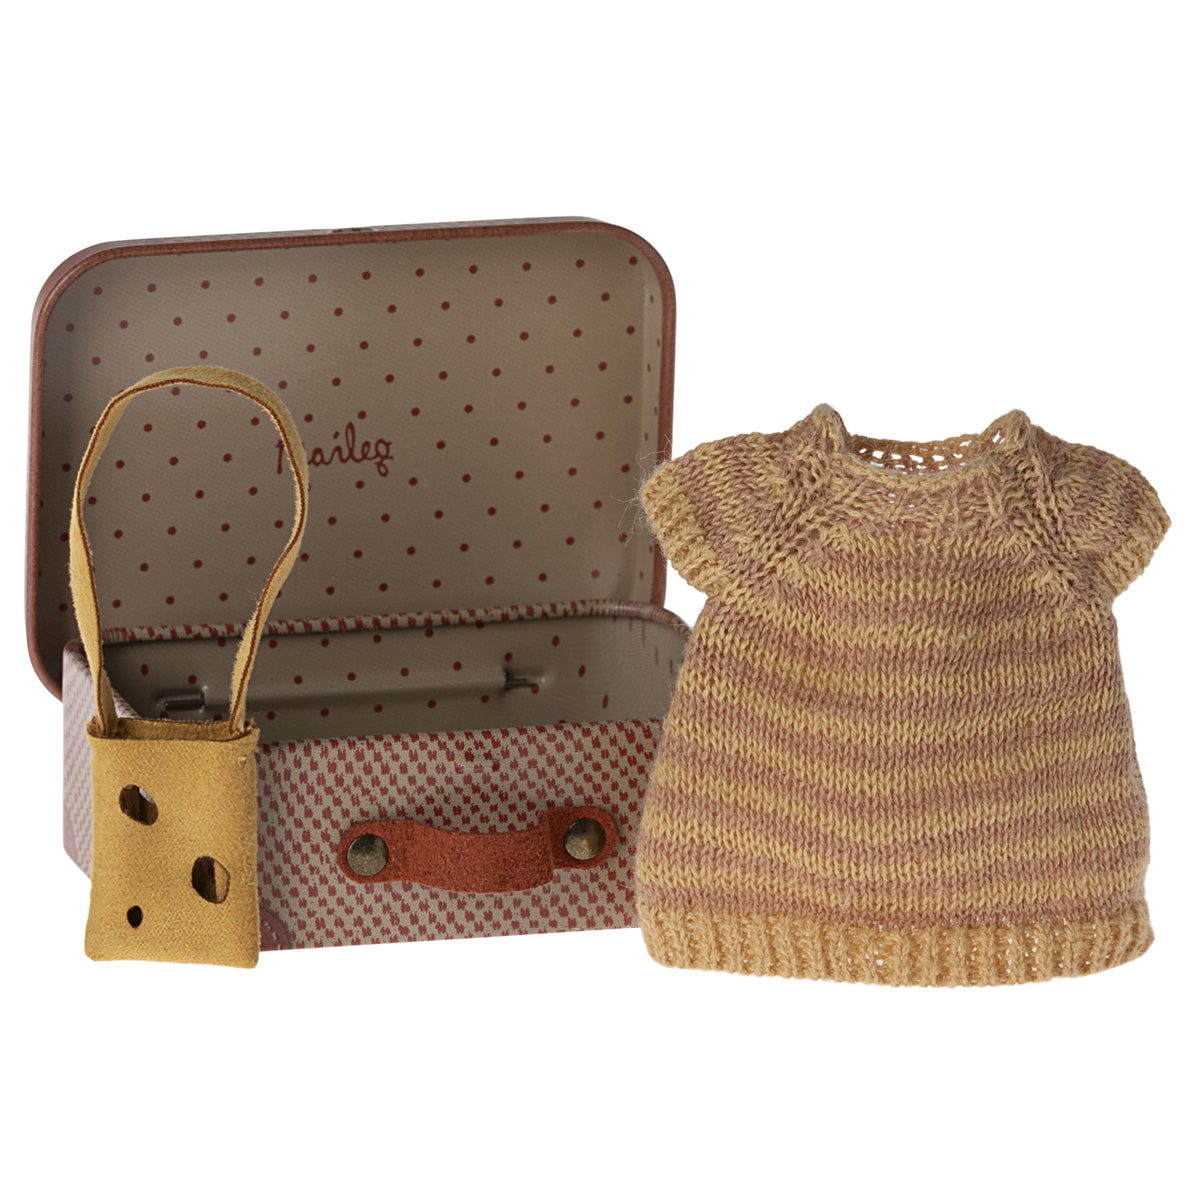 Maileg, Knitted Dress and Bag in Suitcase, Big Sister Mouse 17-4202-00